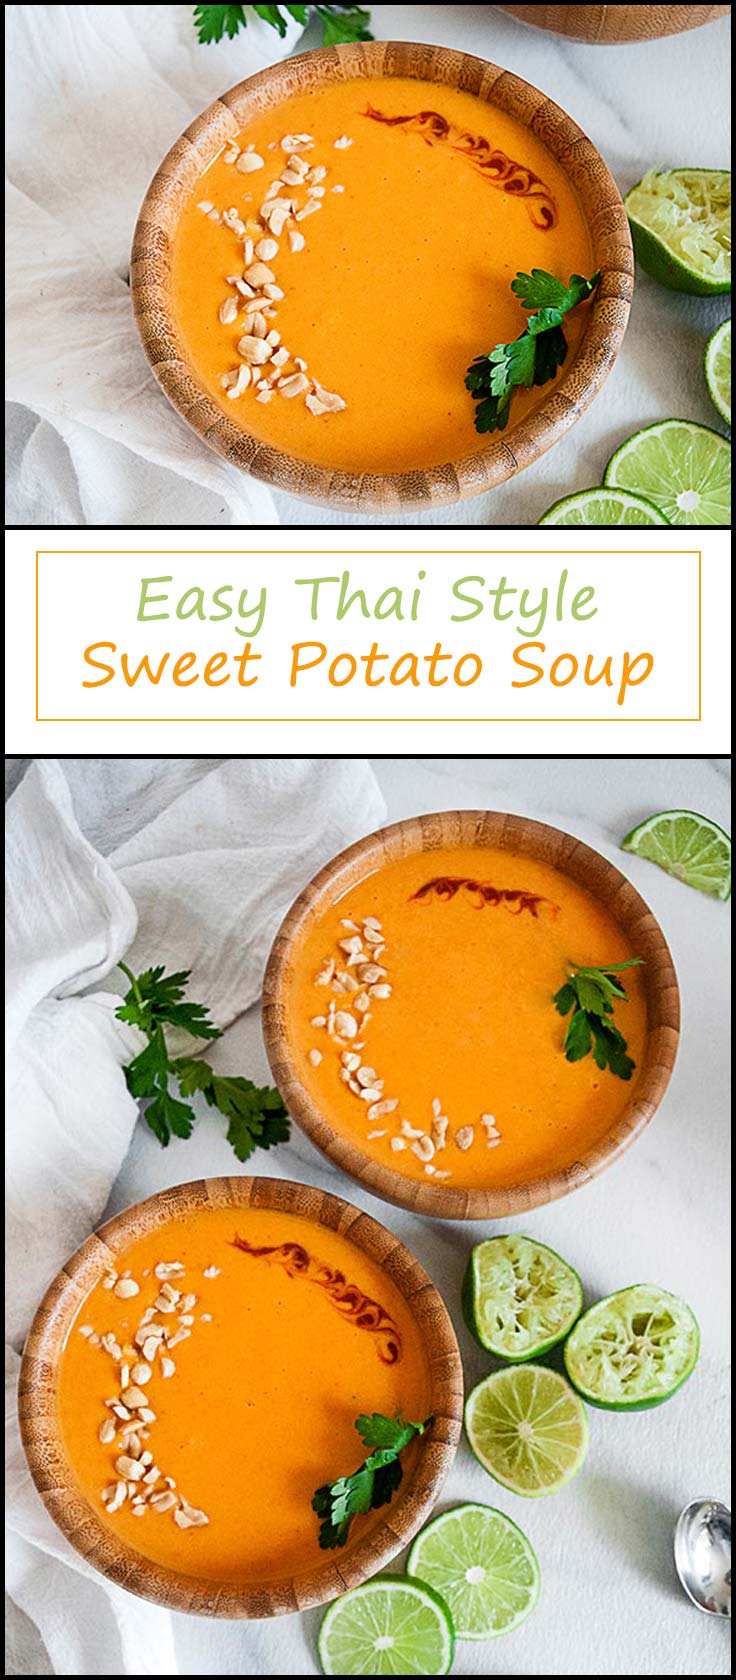 Thai Sweet Potato Soup that can be made totally in the microwave from www.seasonedsprinkles.com